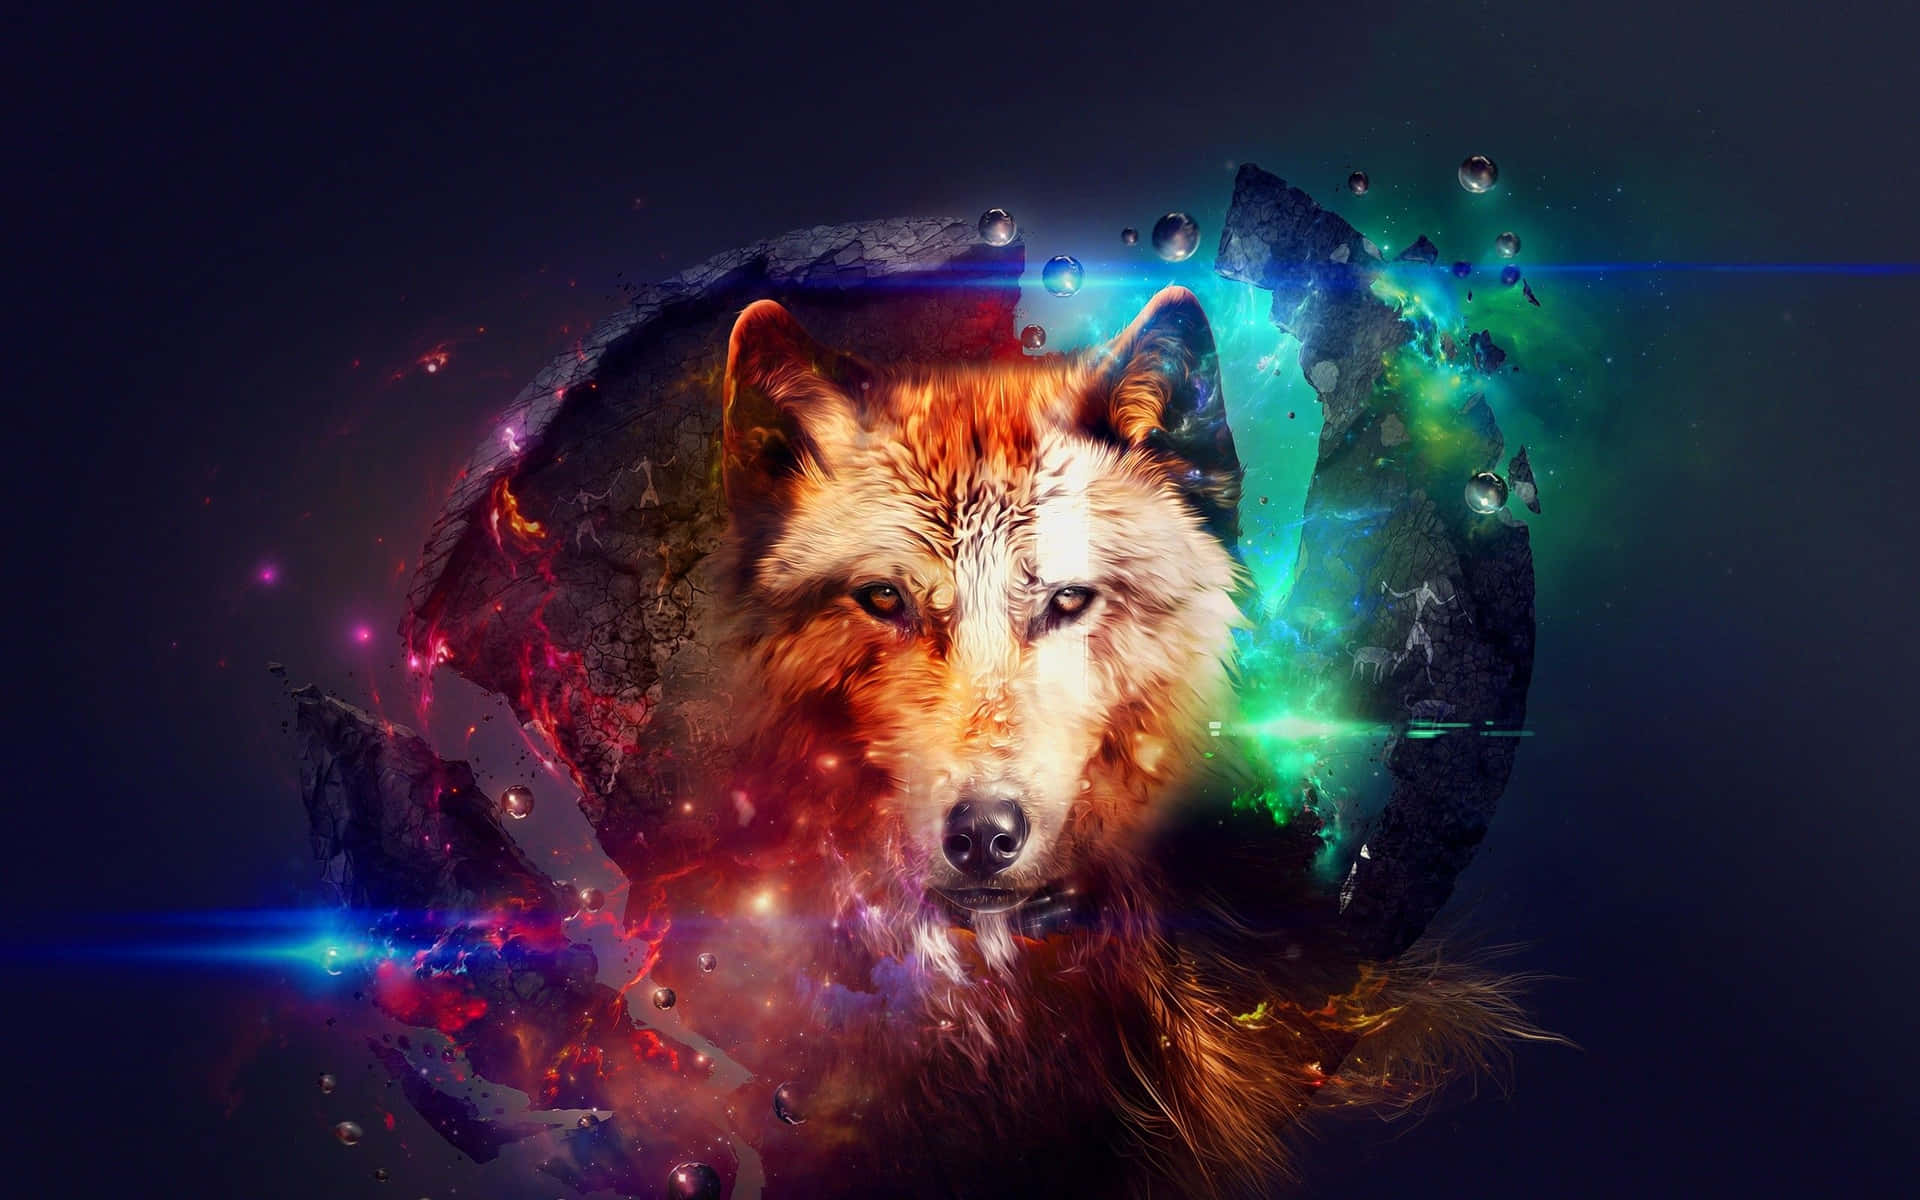 A majestic, powerful Mystical Wolf in its natural environment Wallpaper